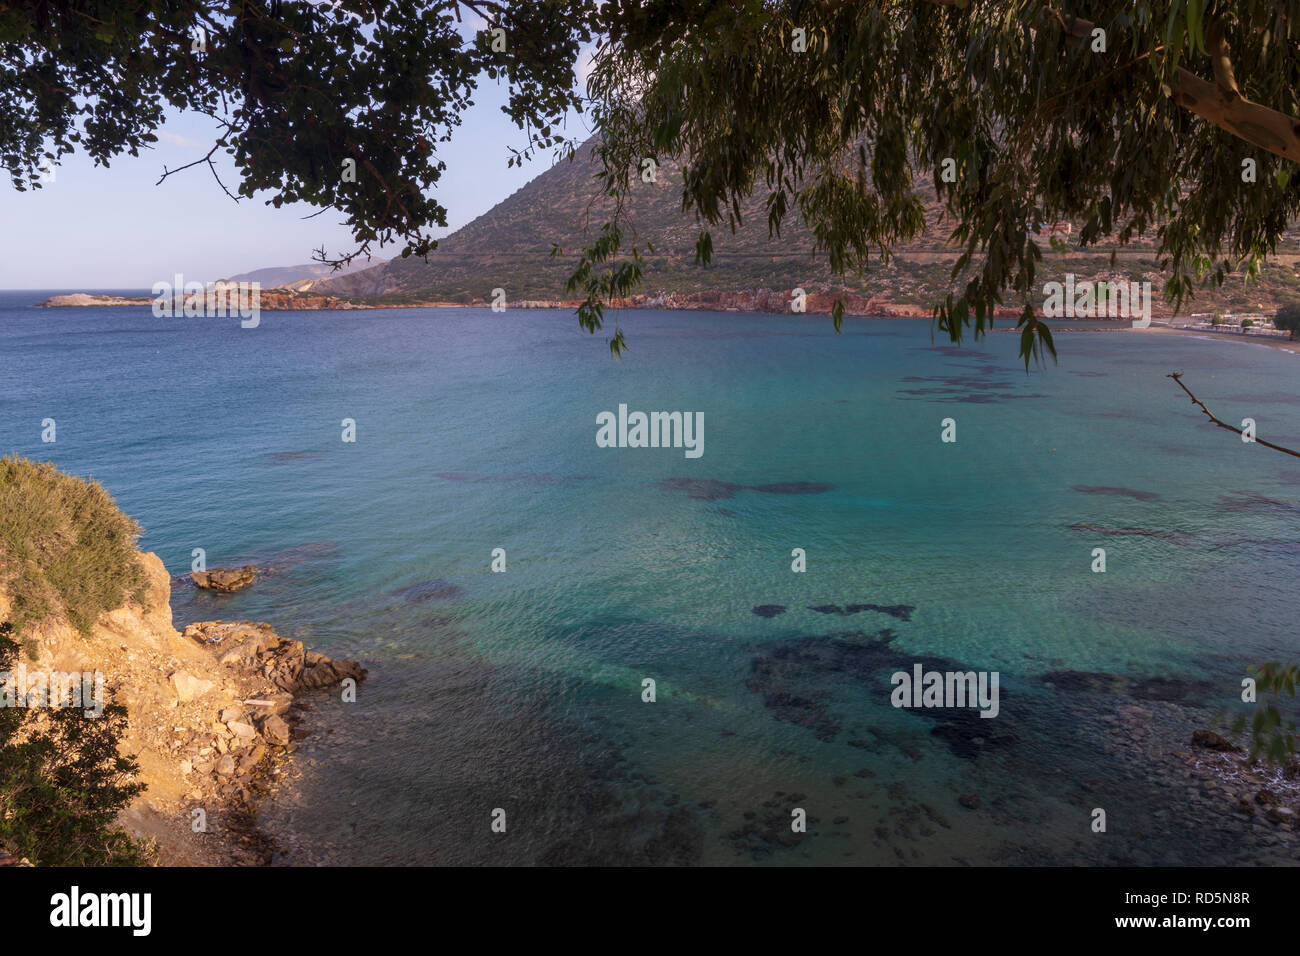 Twigs from a tree in foreground and a bay with blue water in background, picture from Bali area in Rethymno on Crete Island Stock Photo